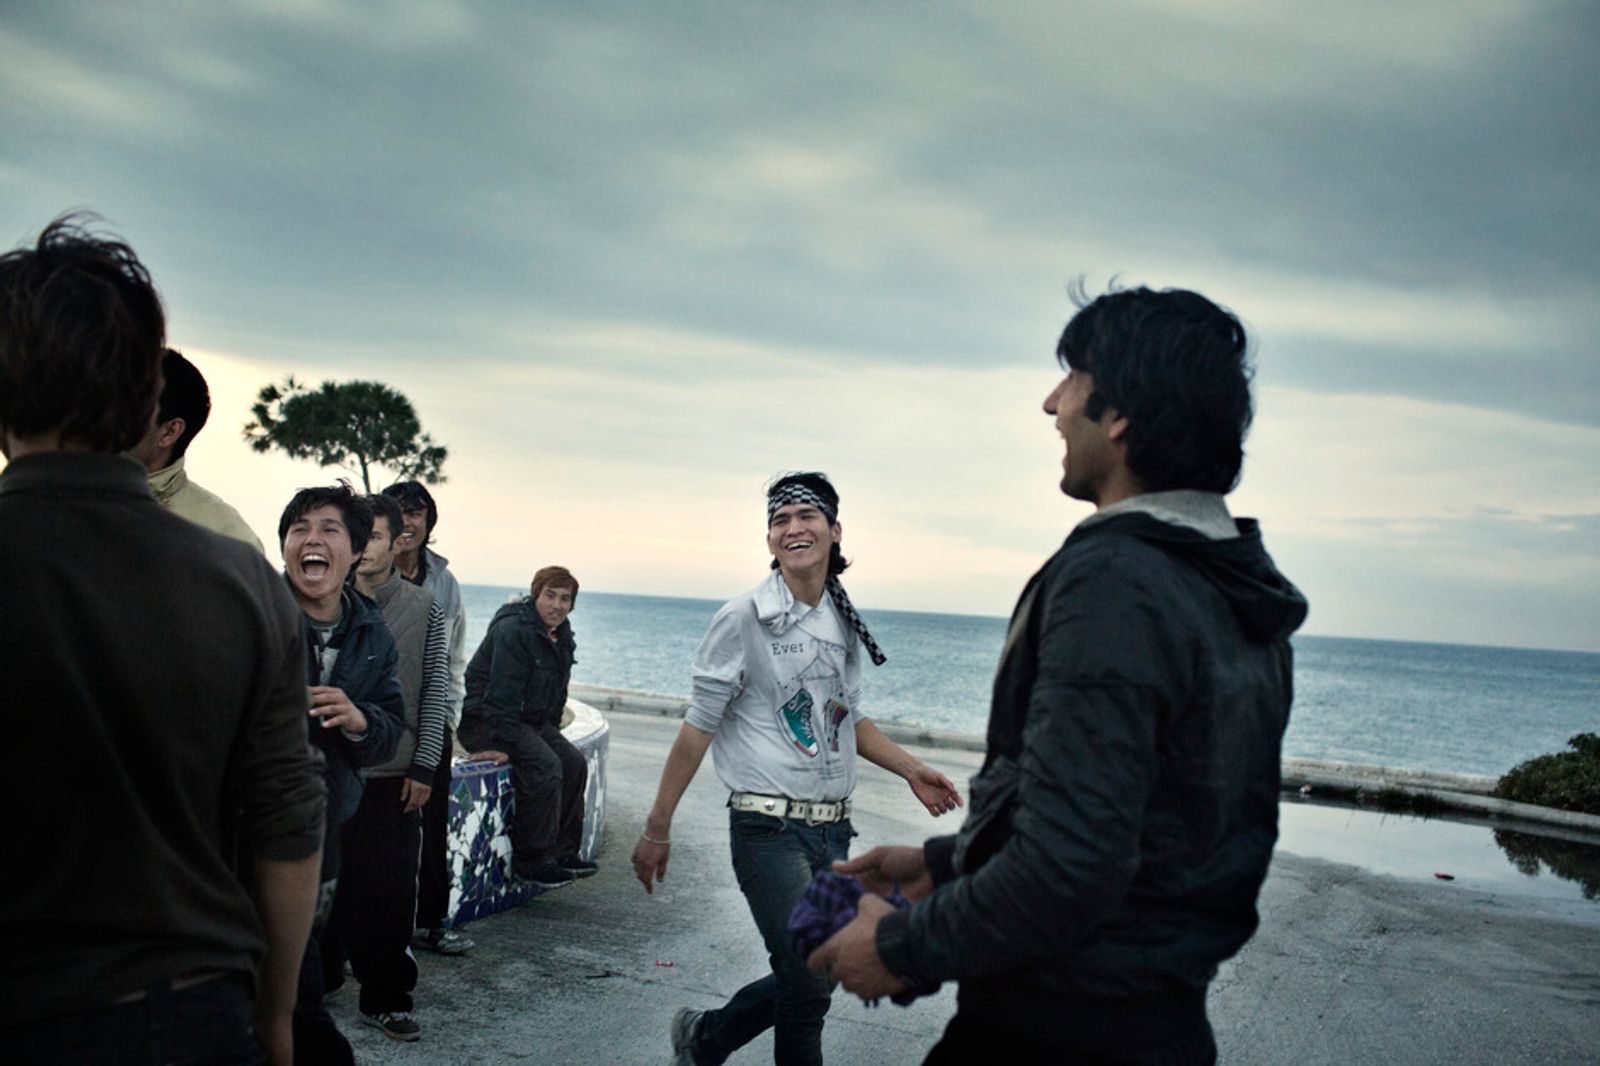 © Alessandro Penso - 2012. Patras . Greece. Young Afghans play near the Port of Patras.